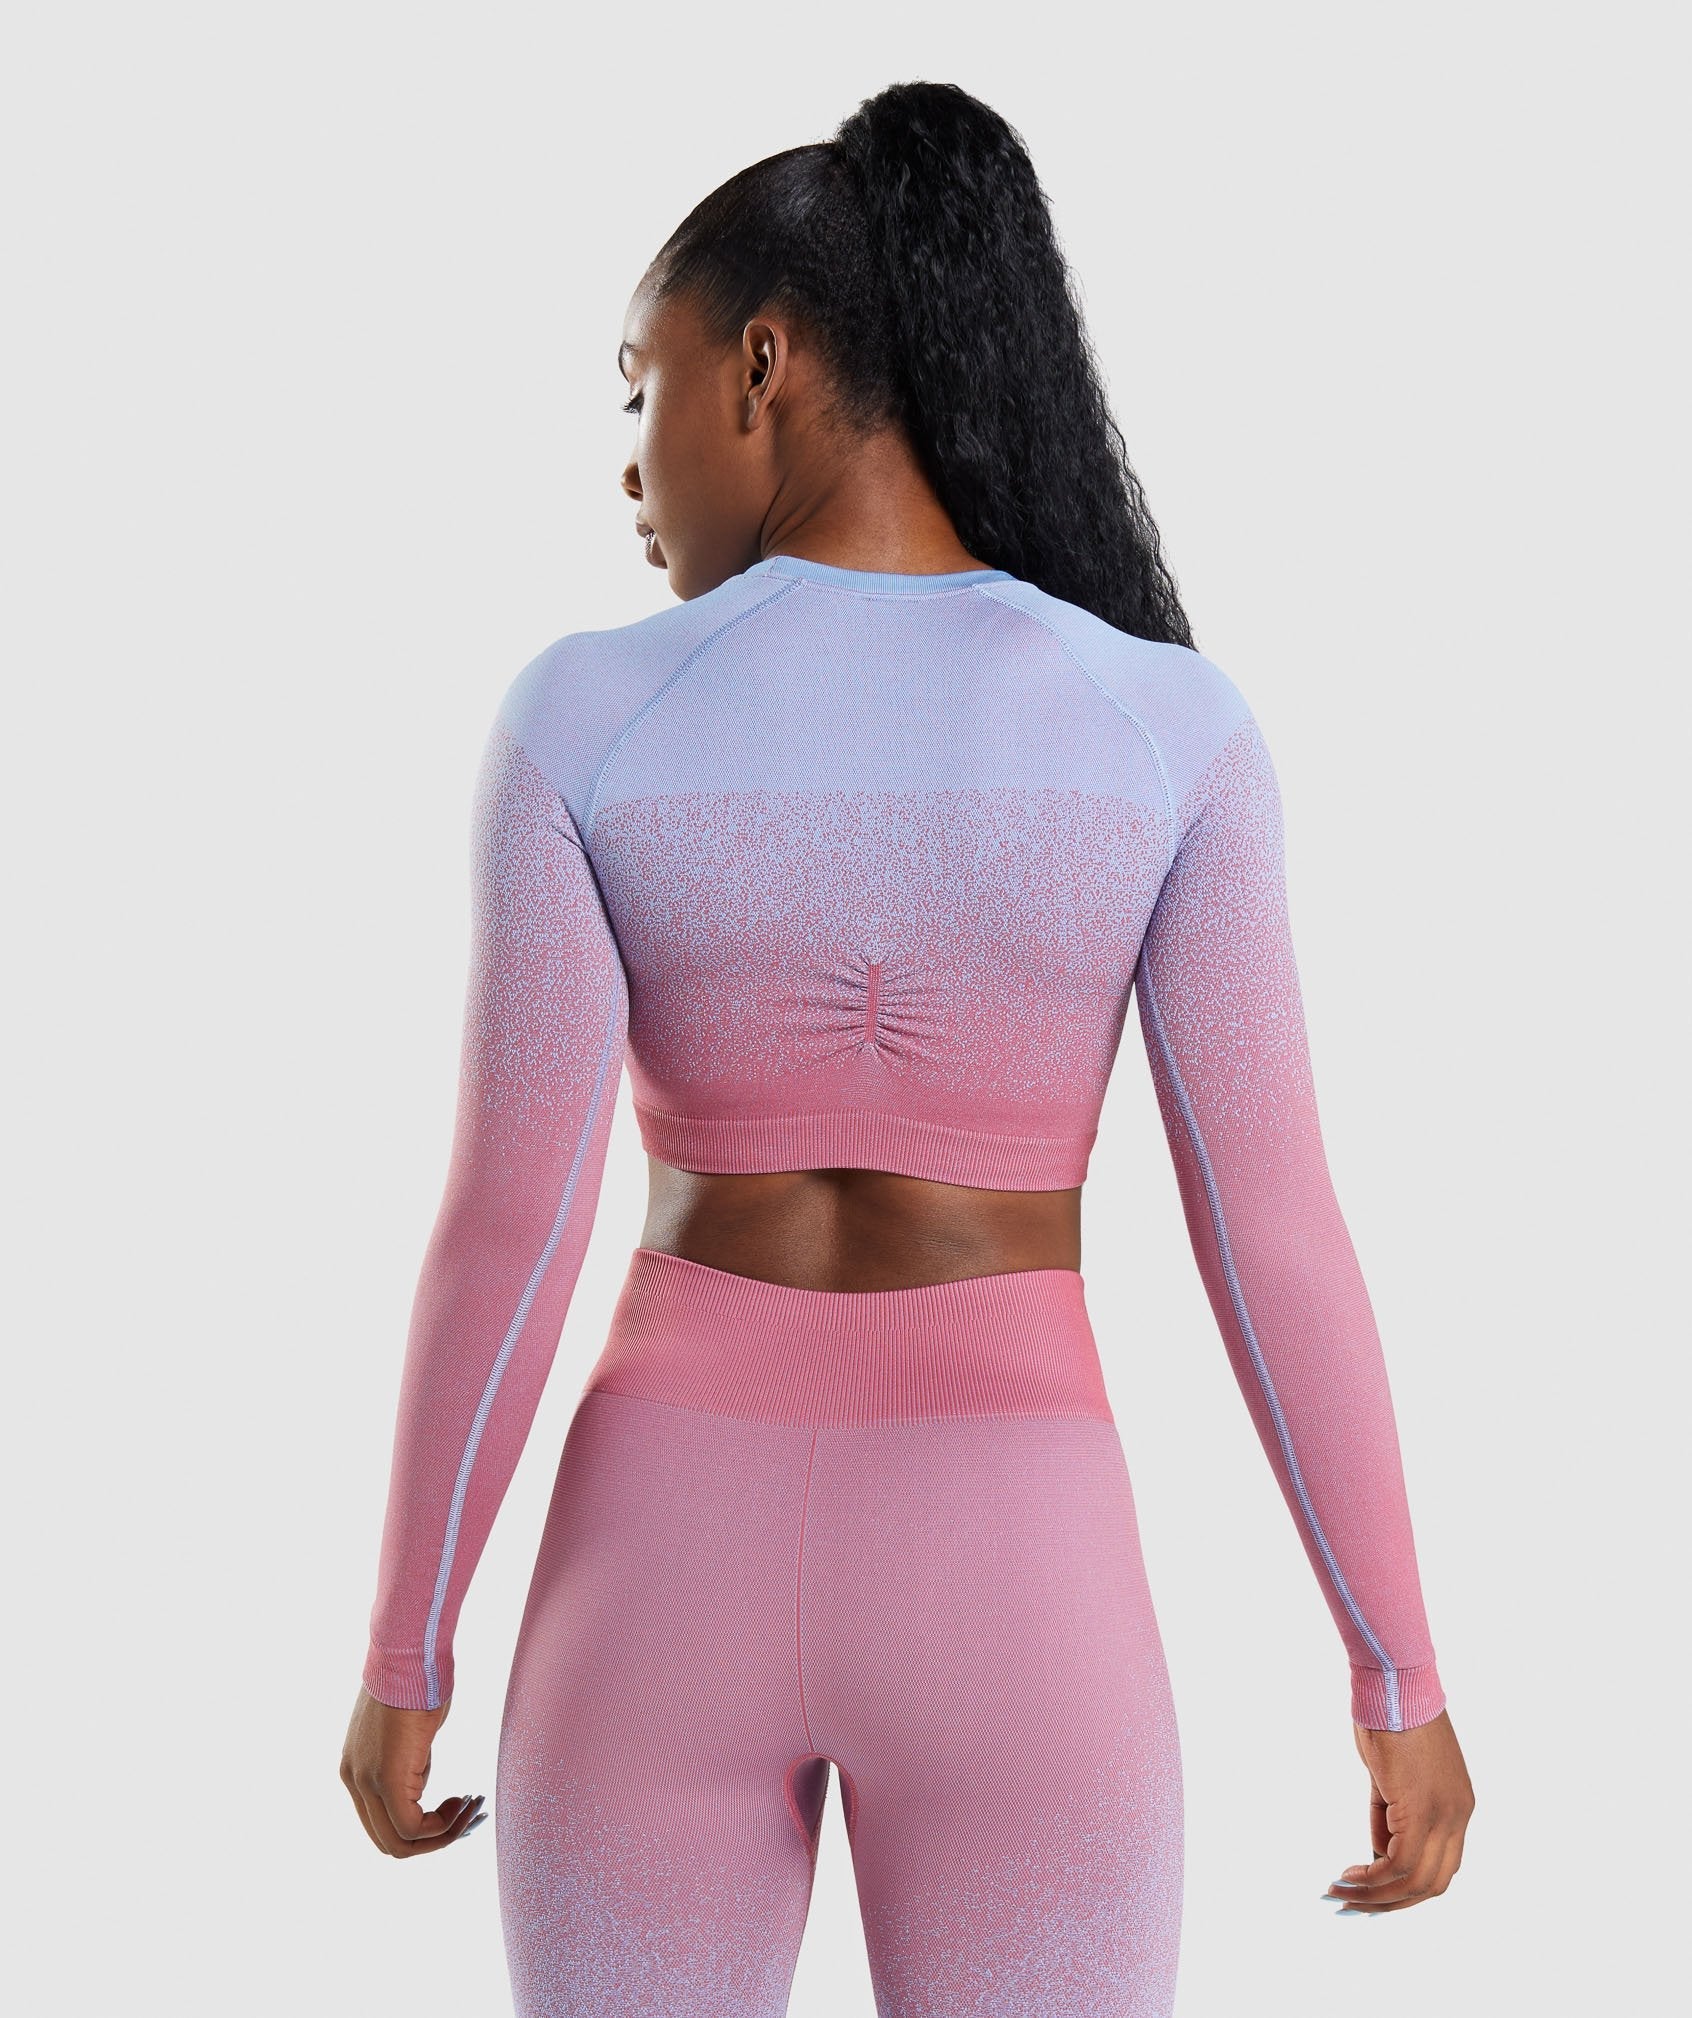 Adapt Ombre Seamless Long Sleeve Crop Top in Rose Pink/Light Blue - view 2